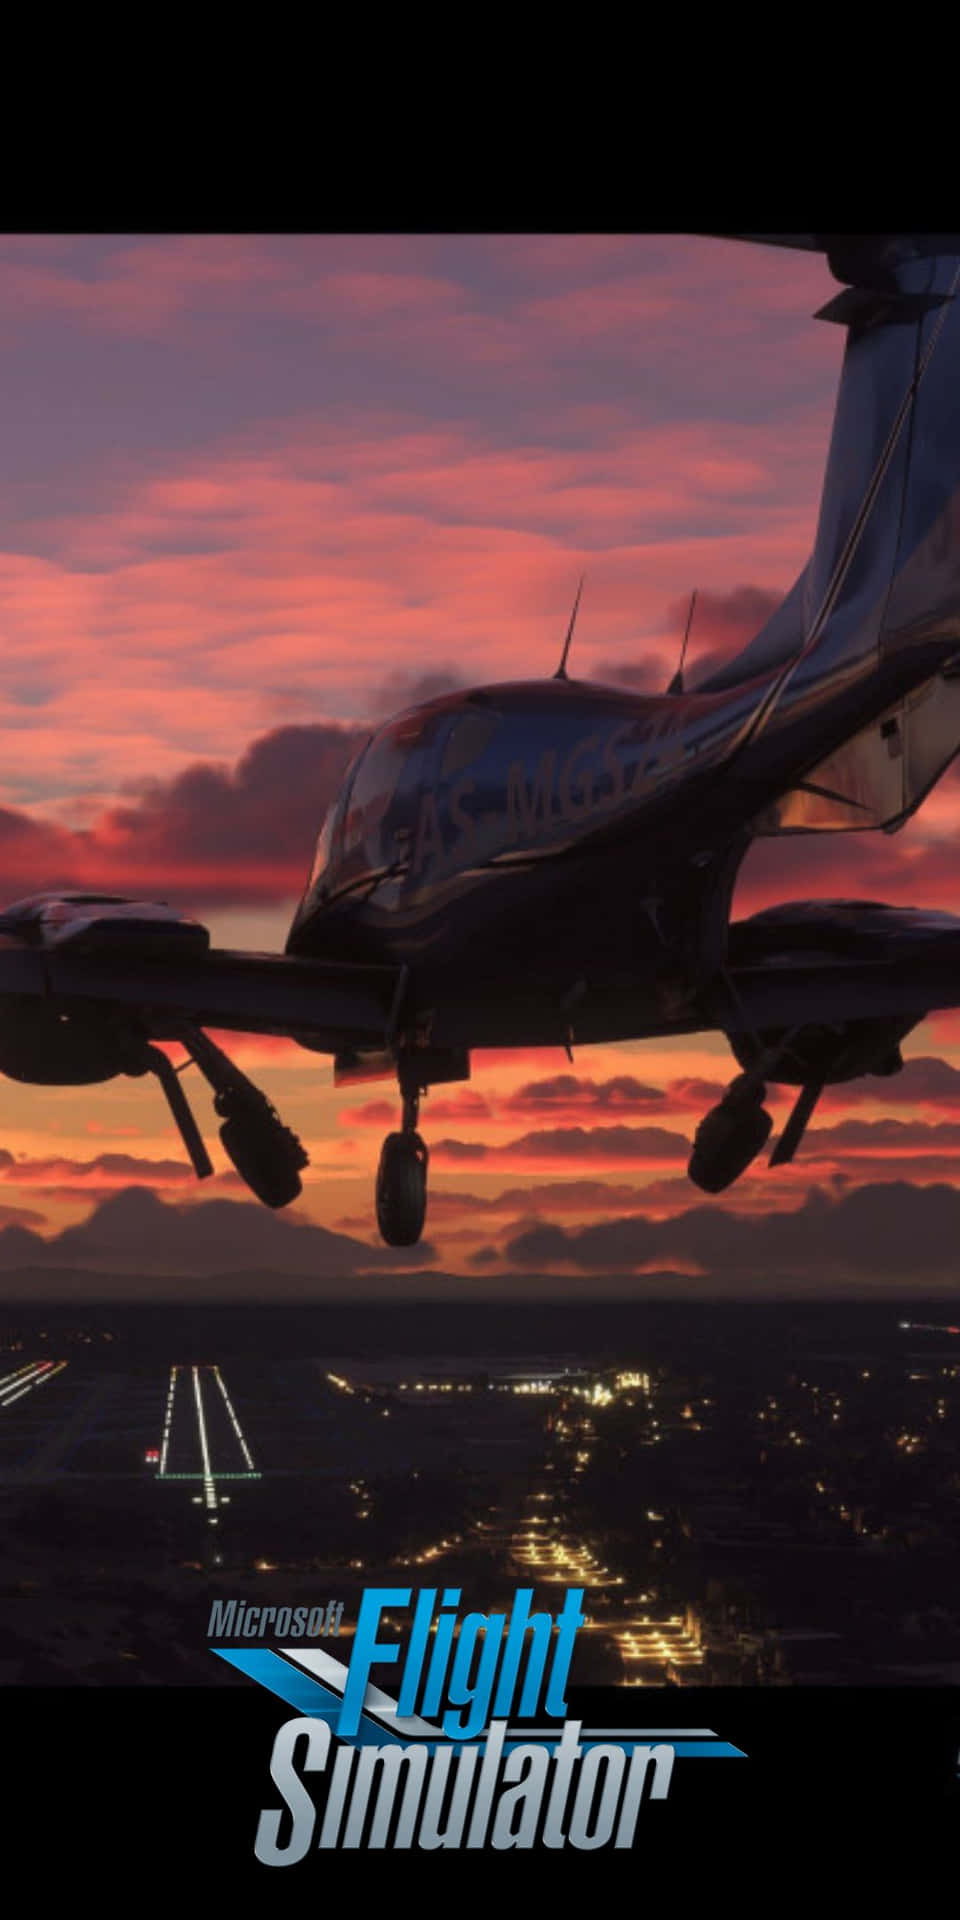 Explore the Skies with Microsoft Flight Simulator on the Pixel 3